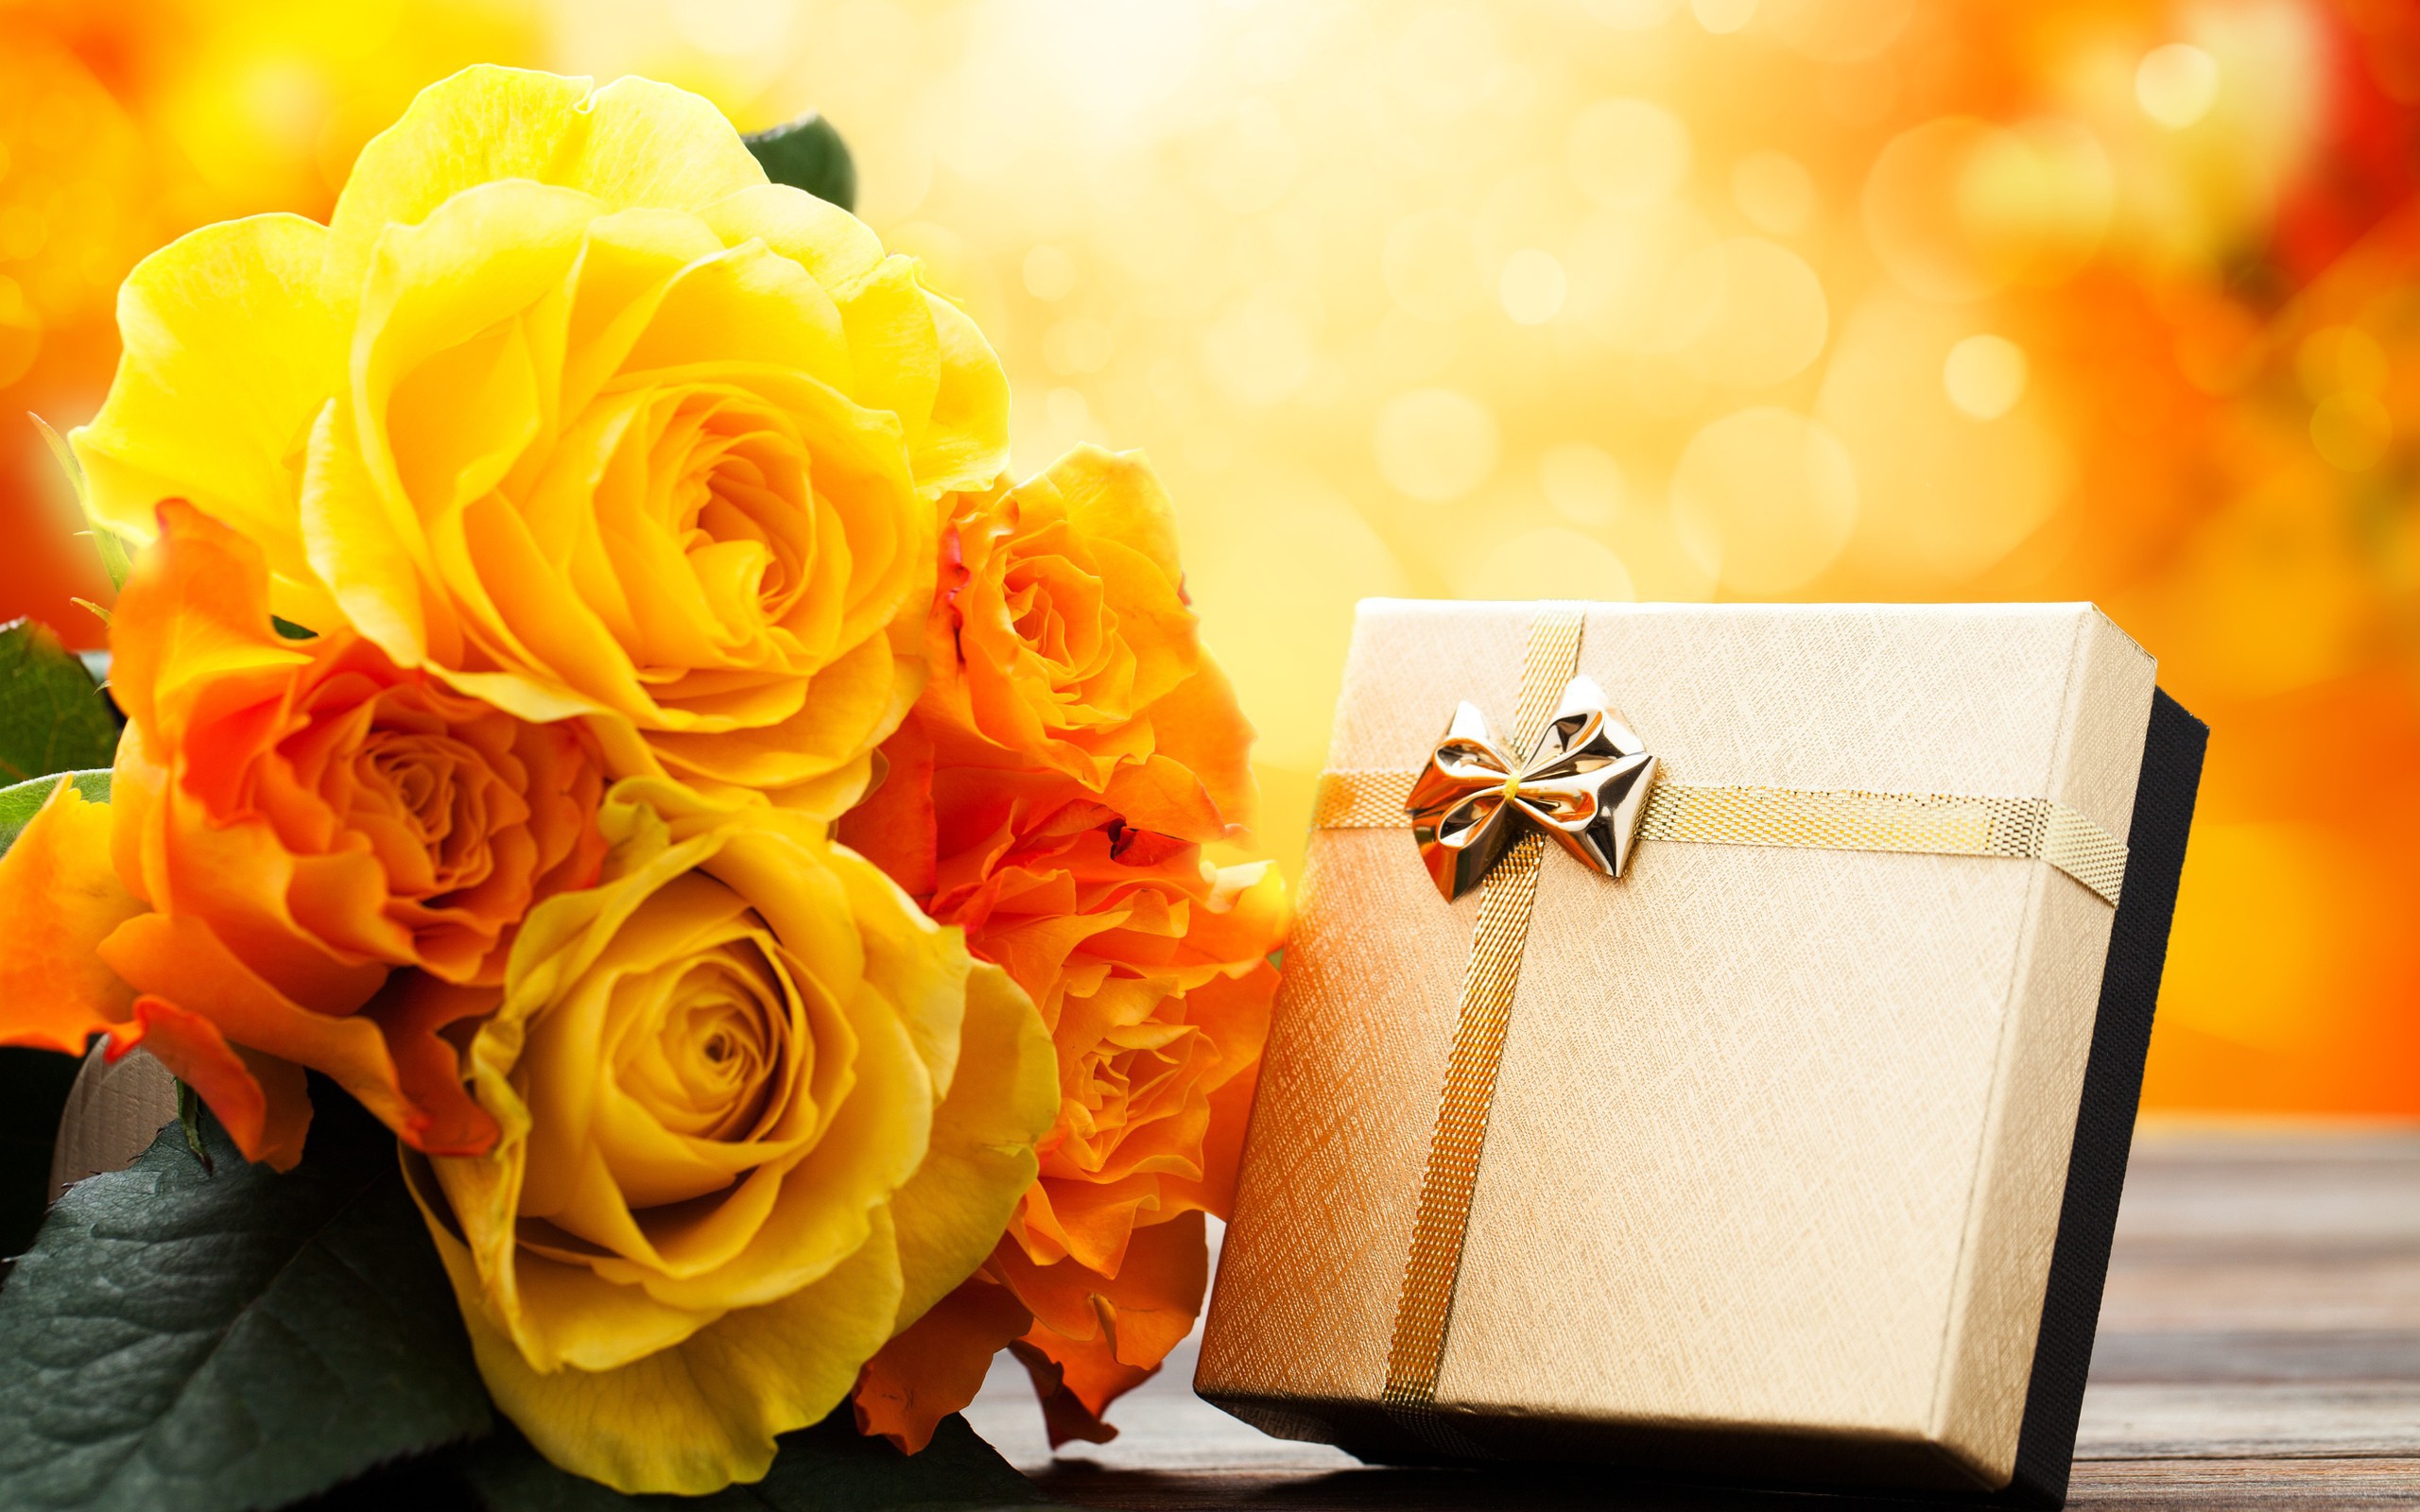 Creative_Wallpaper___Gift_with_yellow_flowers_041999_.jpg